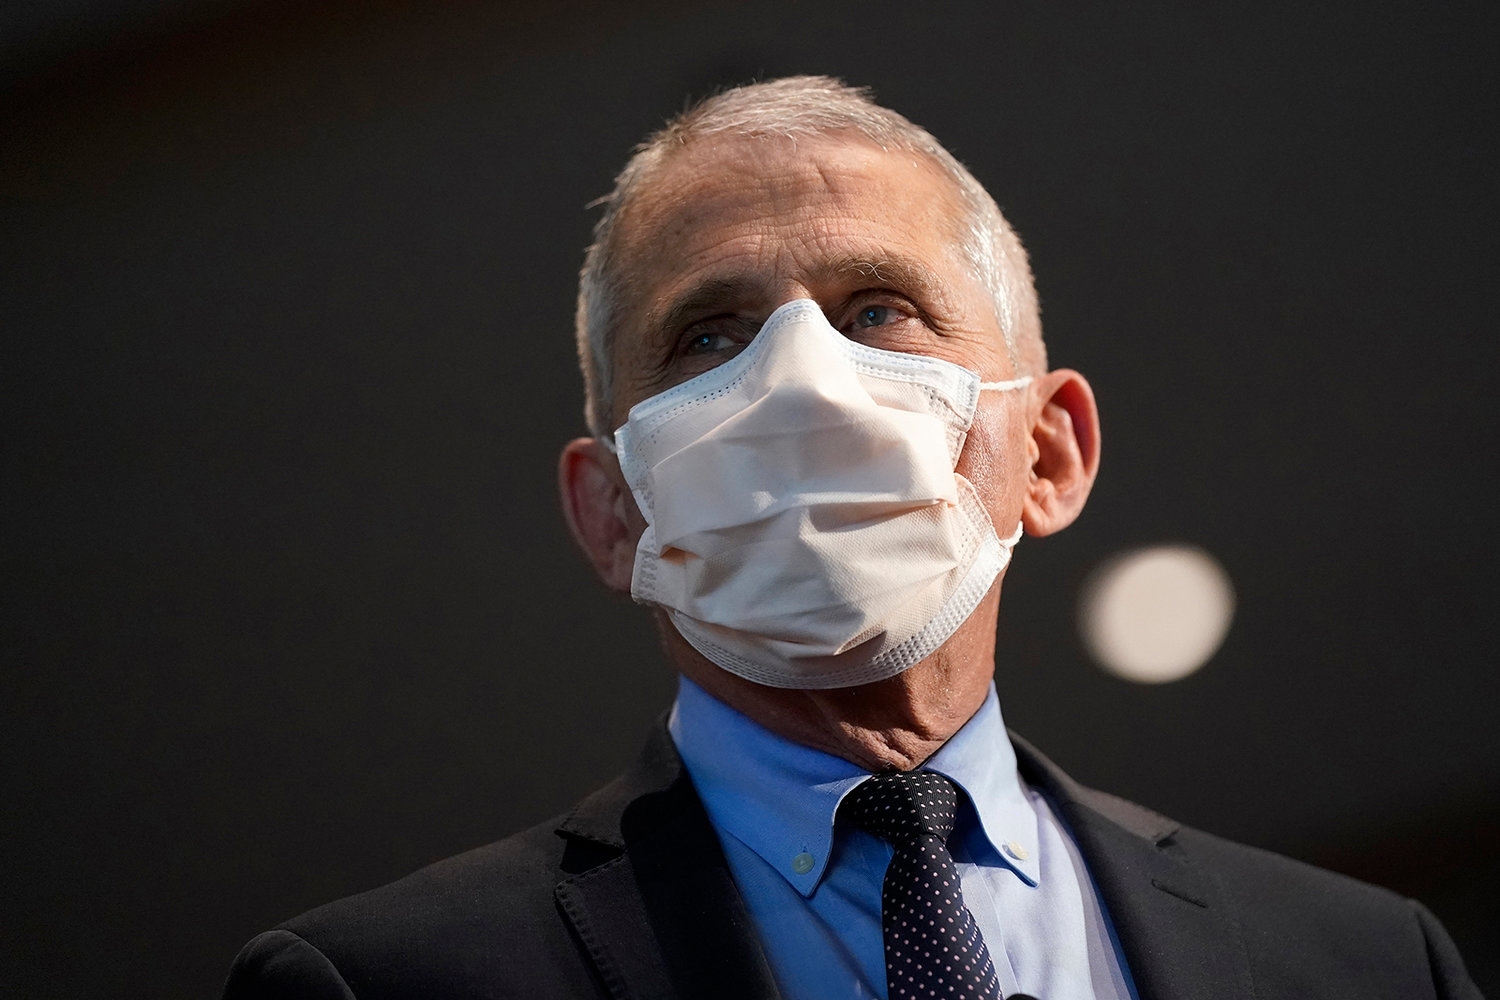 Dr. Anthony Fauci, director of the National Institute of Allergy and Infectious Diseases, said Sunday that despite falling rates, the virus can bounce back.  (Patrick Semansky/Pool/Getty Images/TNS)